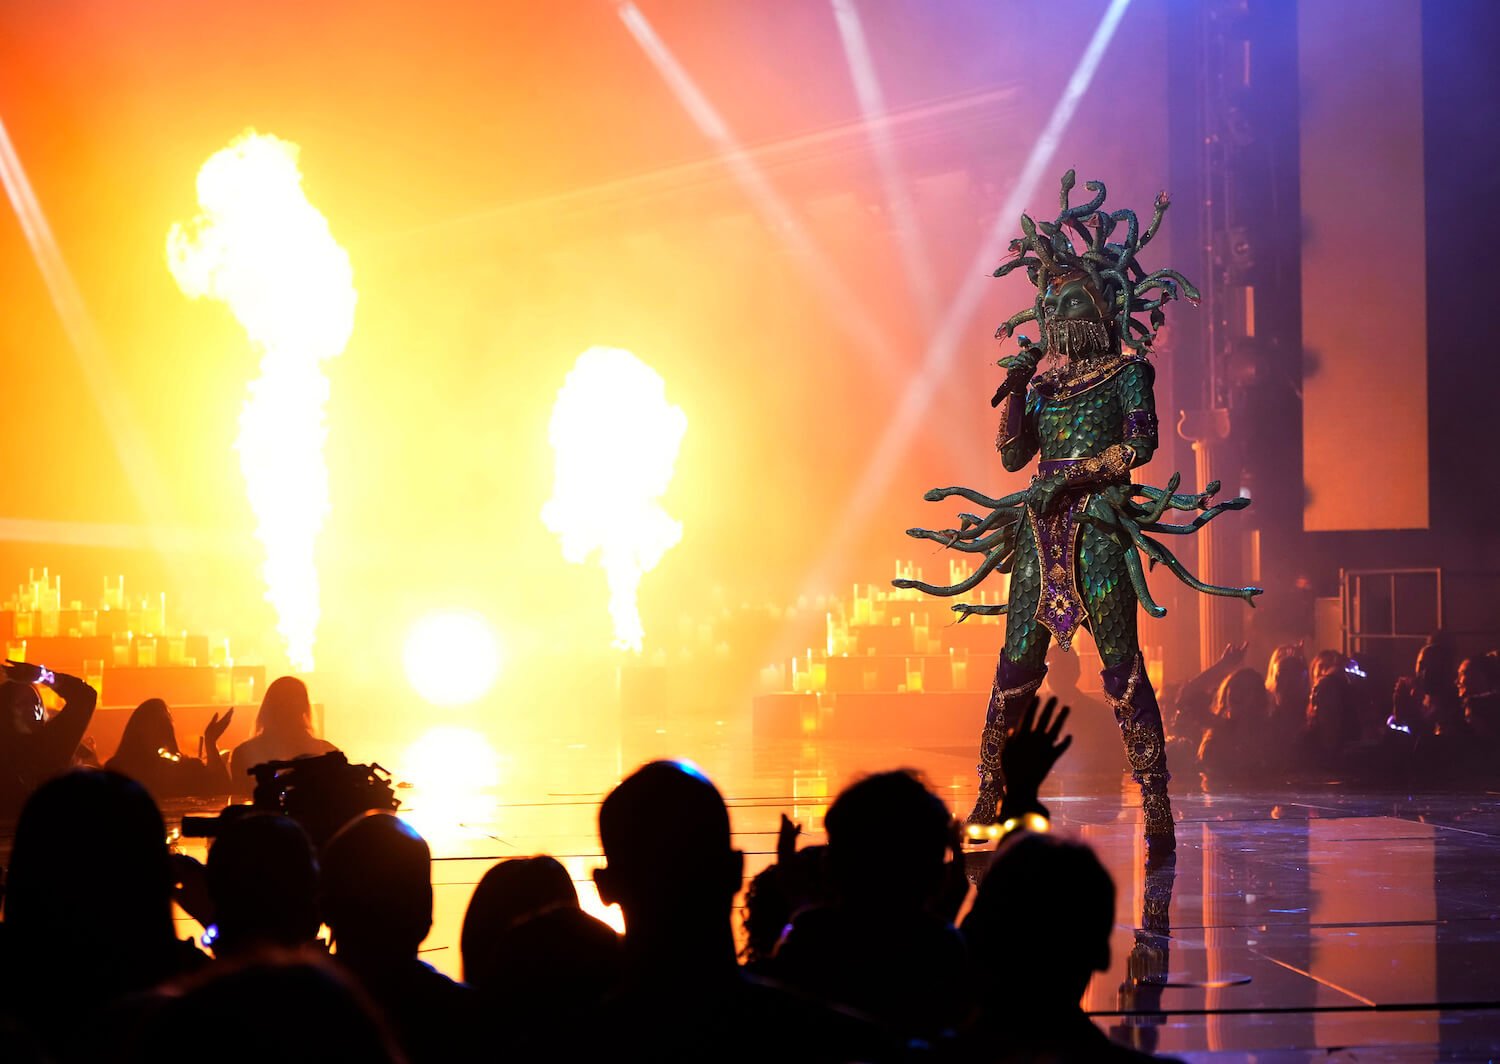 Medusa singing against a fire background in 'The Masked Singer' Season 9